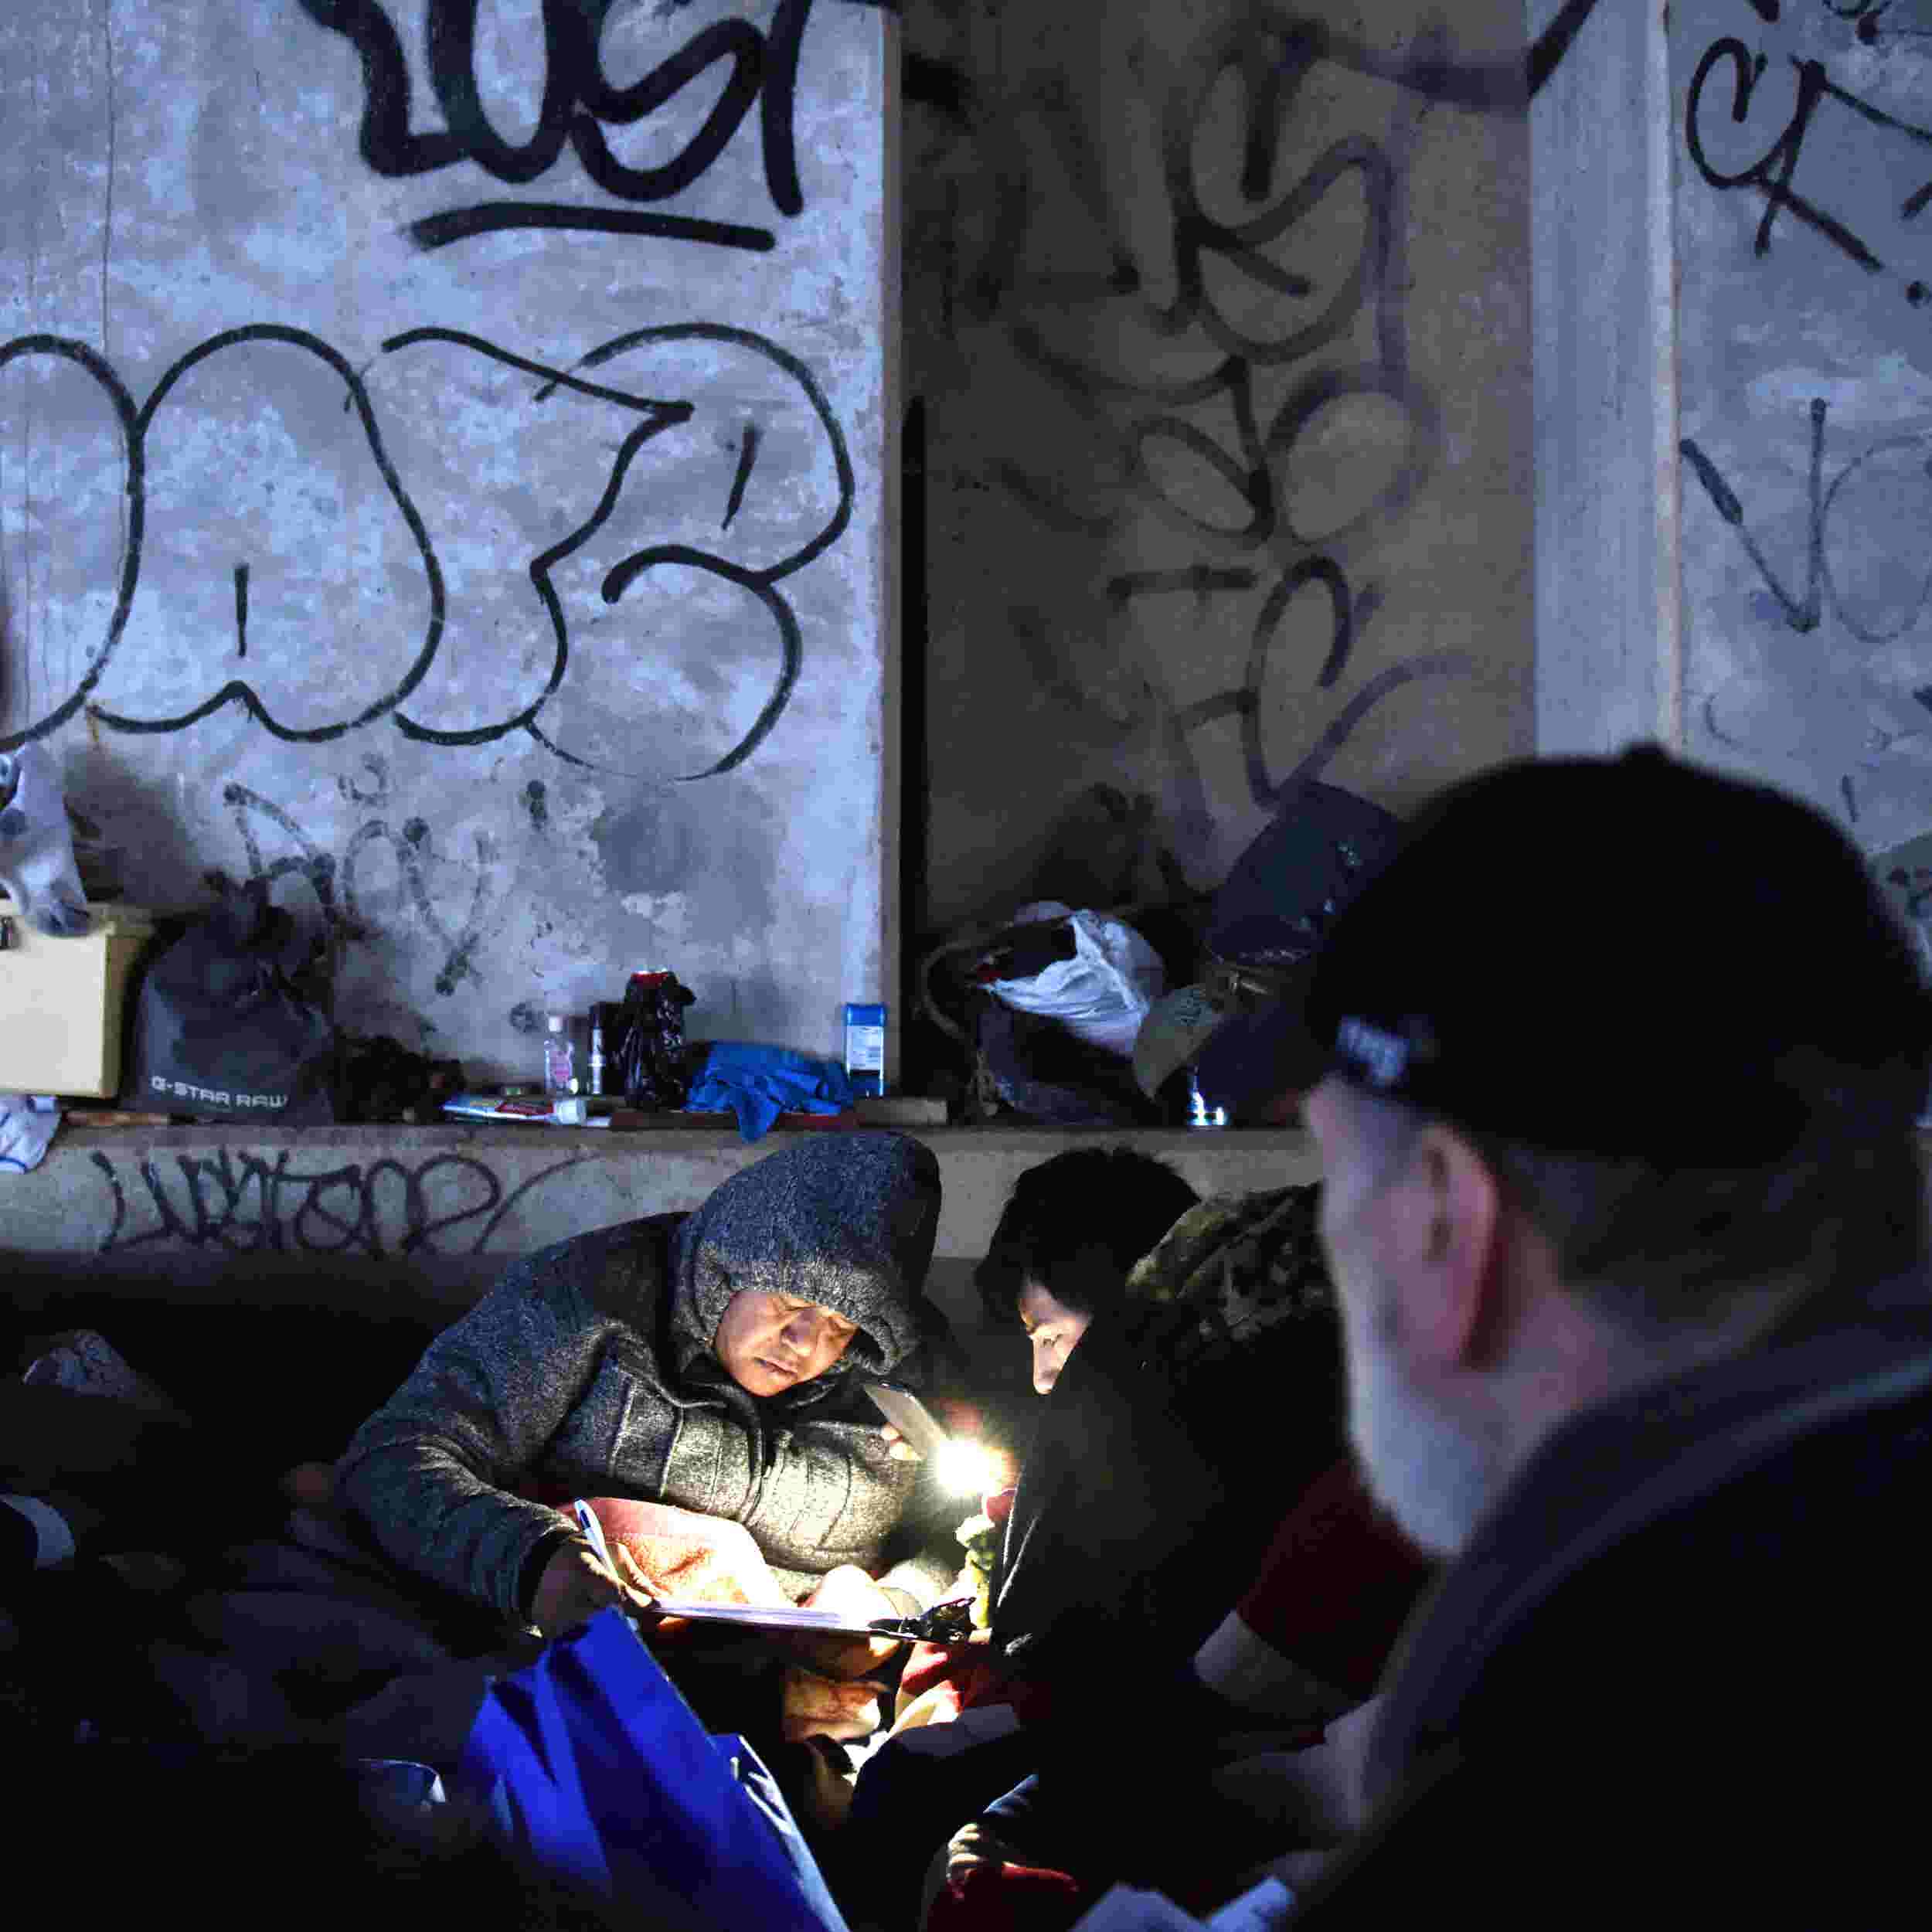 Homeless Hard To Live In Nj If You Don T Make A Certain